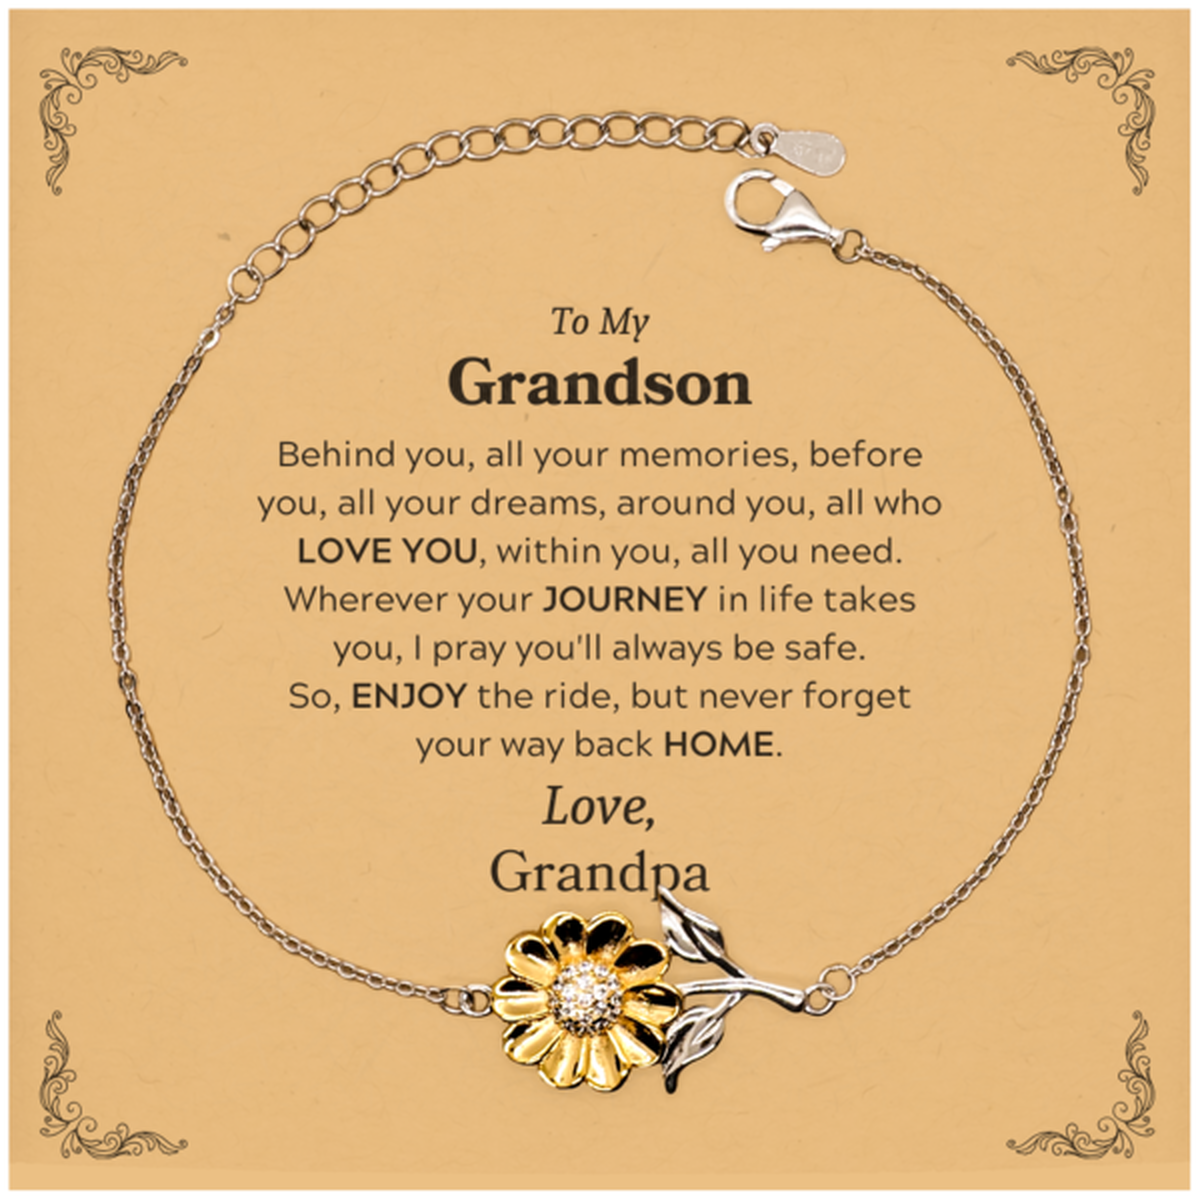 To My Grandson Graduation Gifts from Grandpa, Grandson Sunflower Bracelet Christmas Birthday Gifts for Grandson Behind you, all your memories, before you, all your dreams. Love, Grandpa